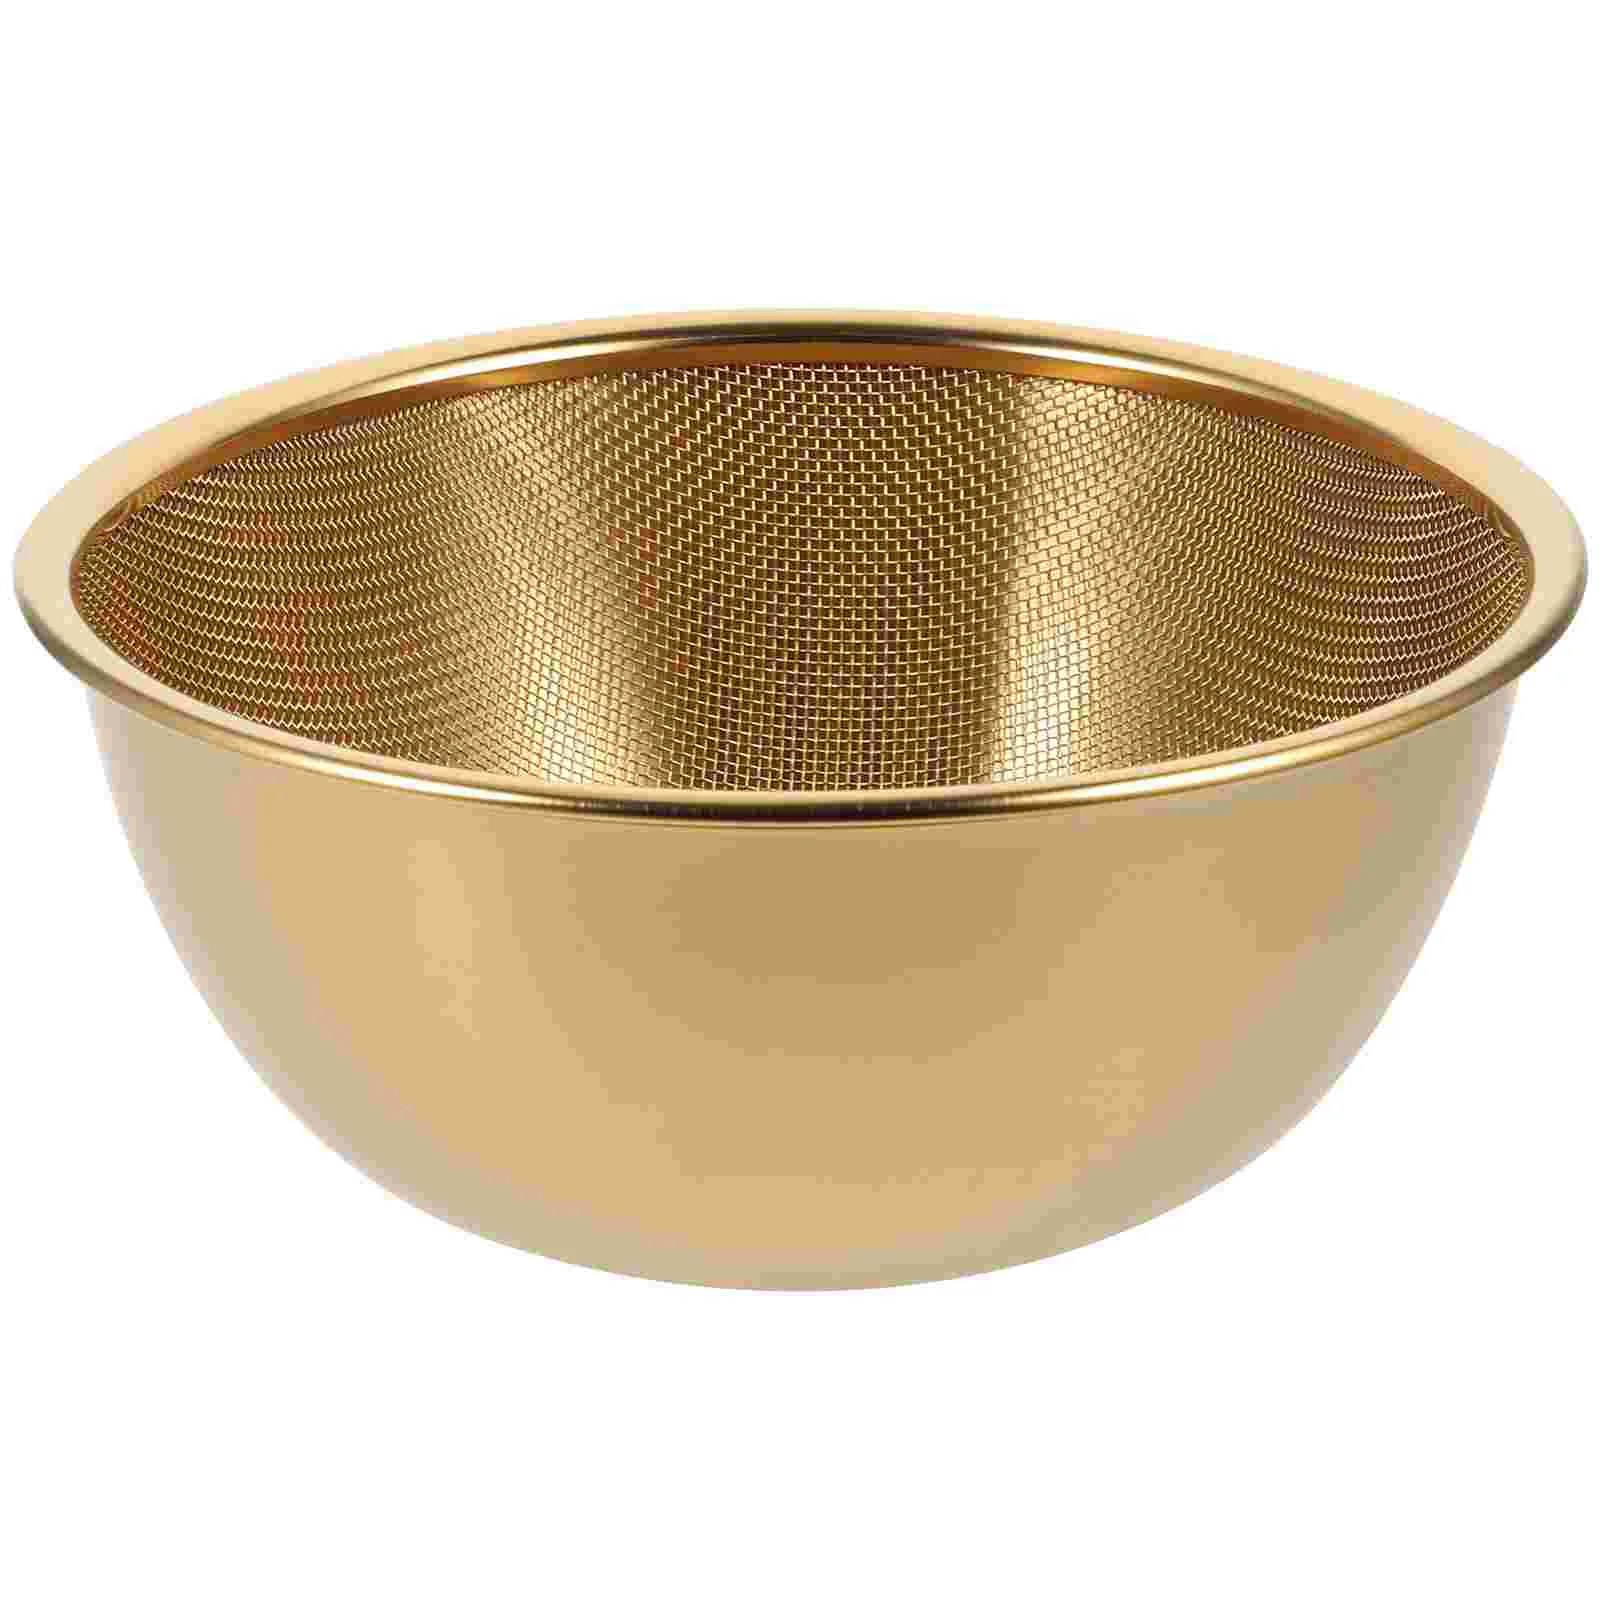 

2pcs/Set Mesh Strainer Colander Washing Bowl Basket Vegetable Basin Rice Drain Sifter Mesh Wire Stainless Steel Washer for